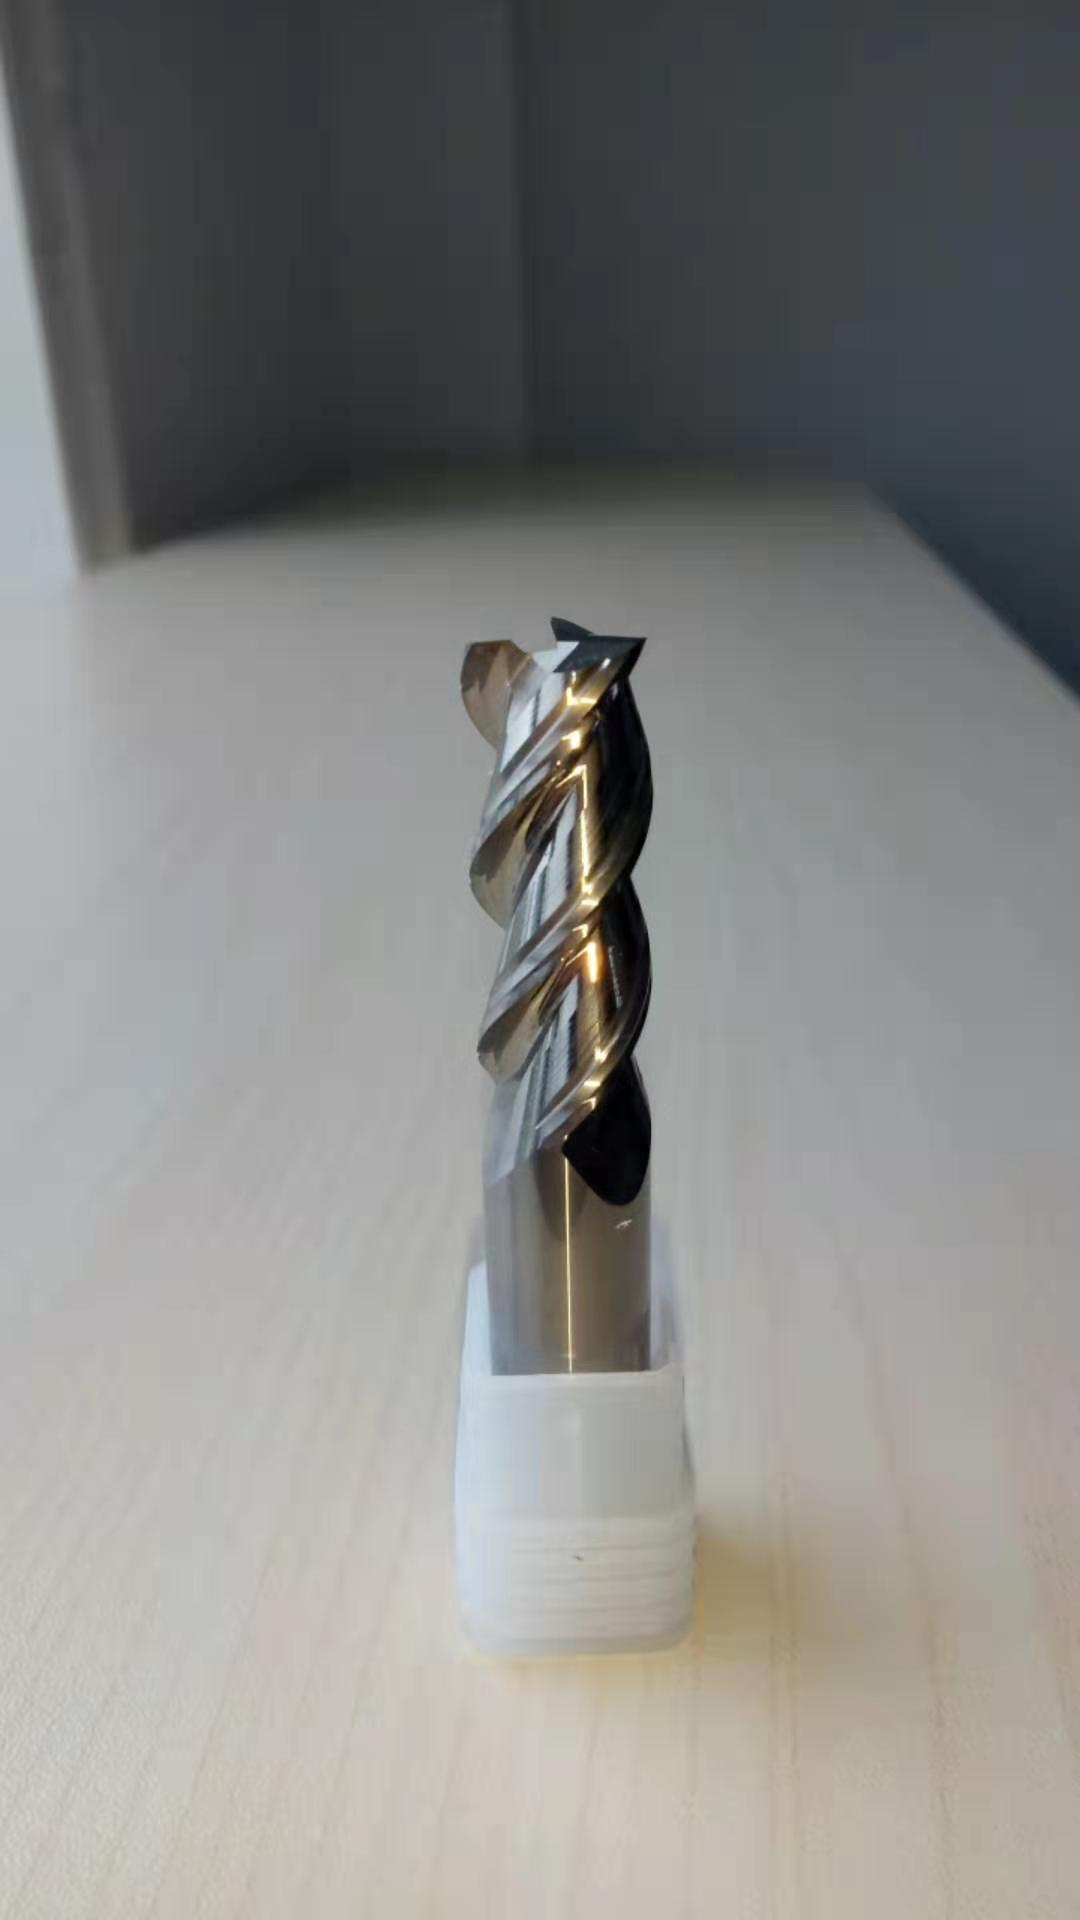 carbide end mills  cutting tools